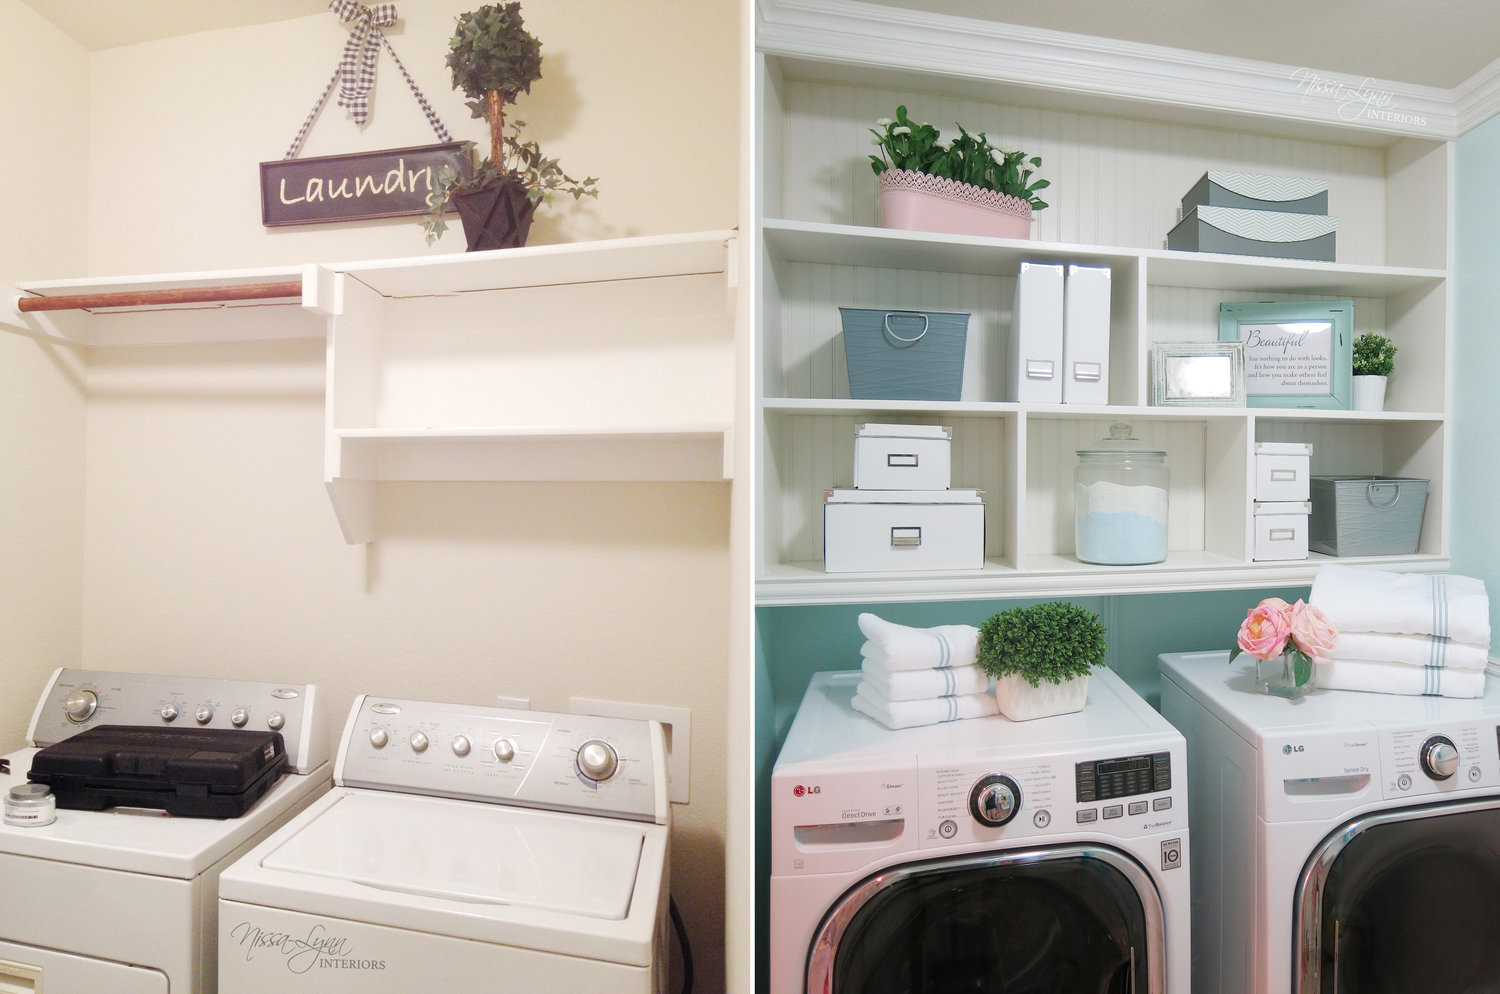 Big Difference with this Laundry Room Remodel! — Nissa-Lynn Interiors